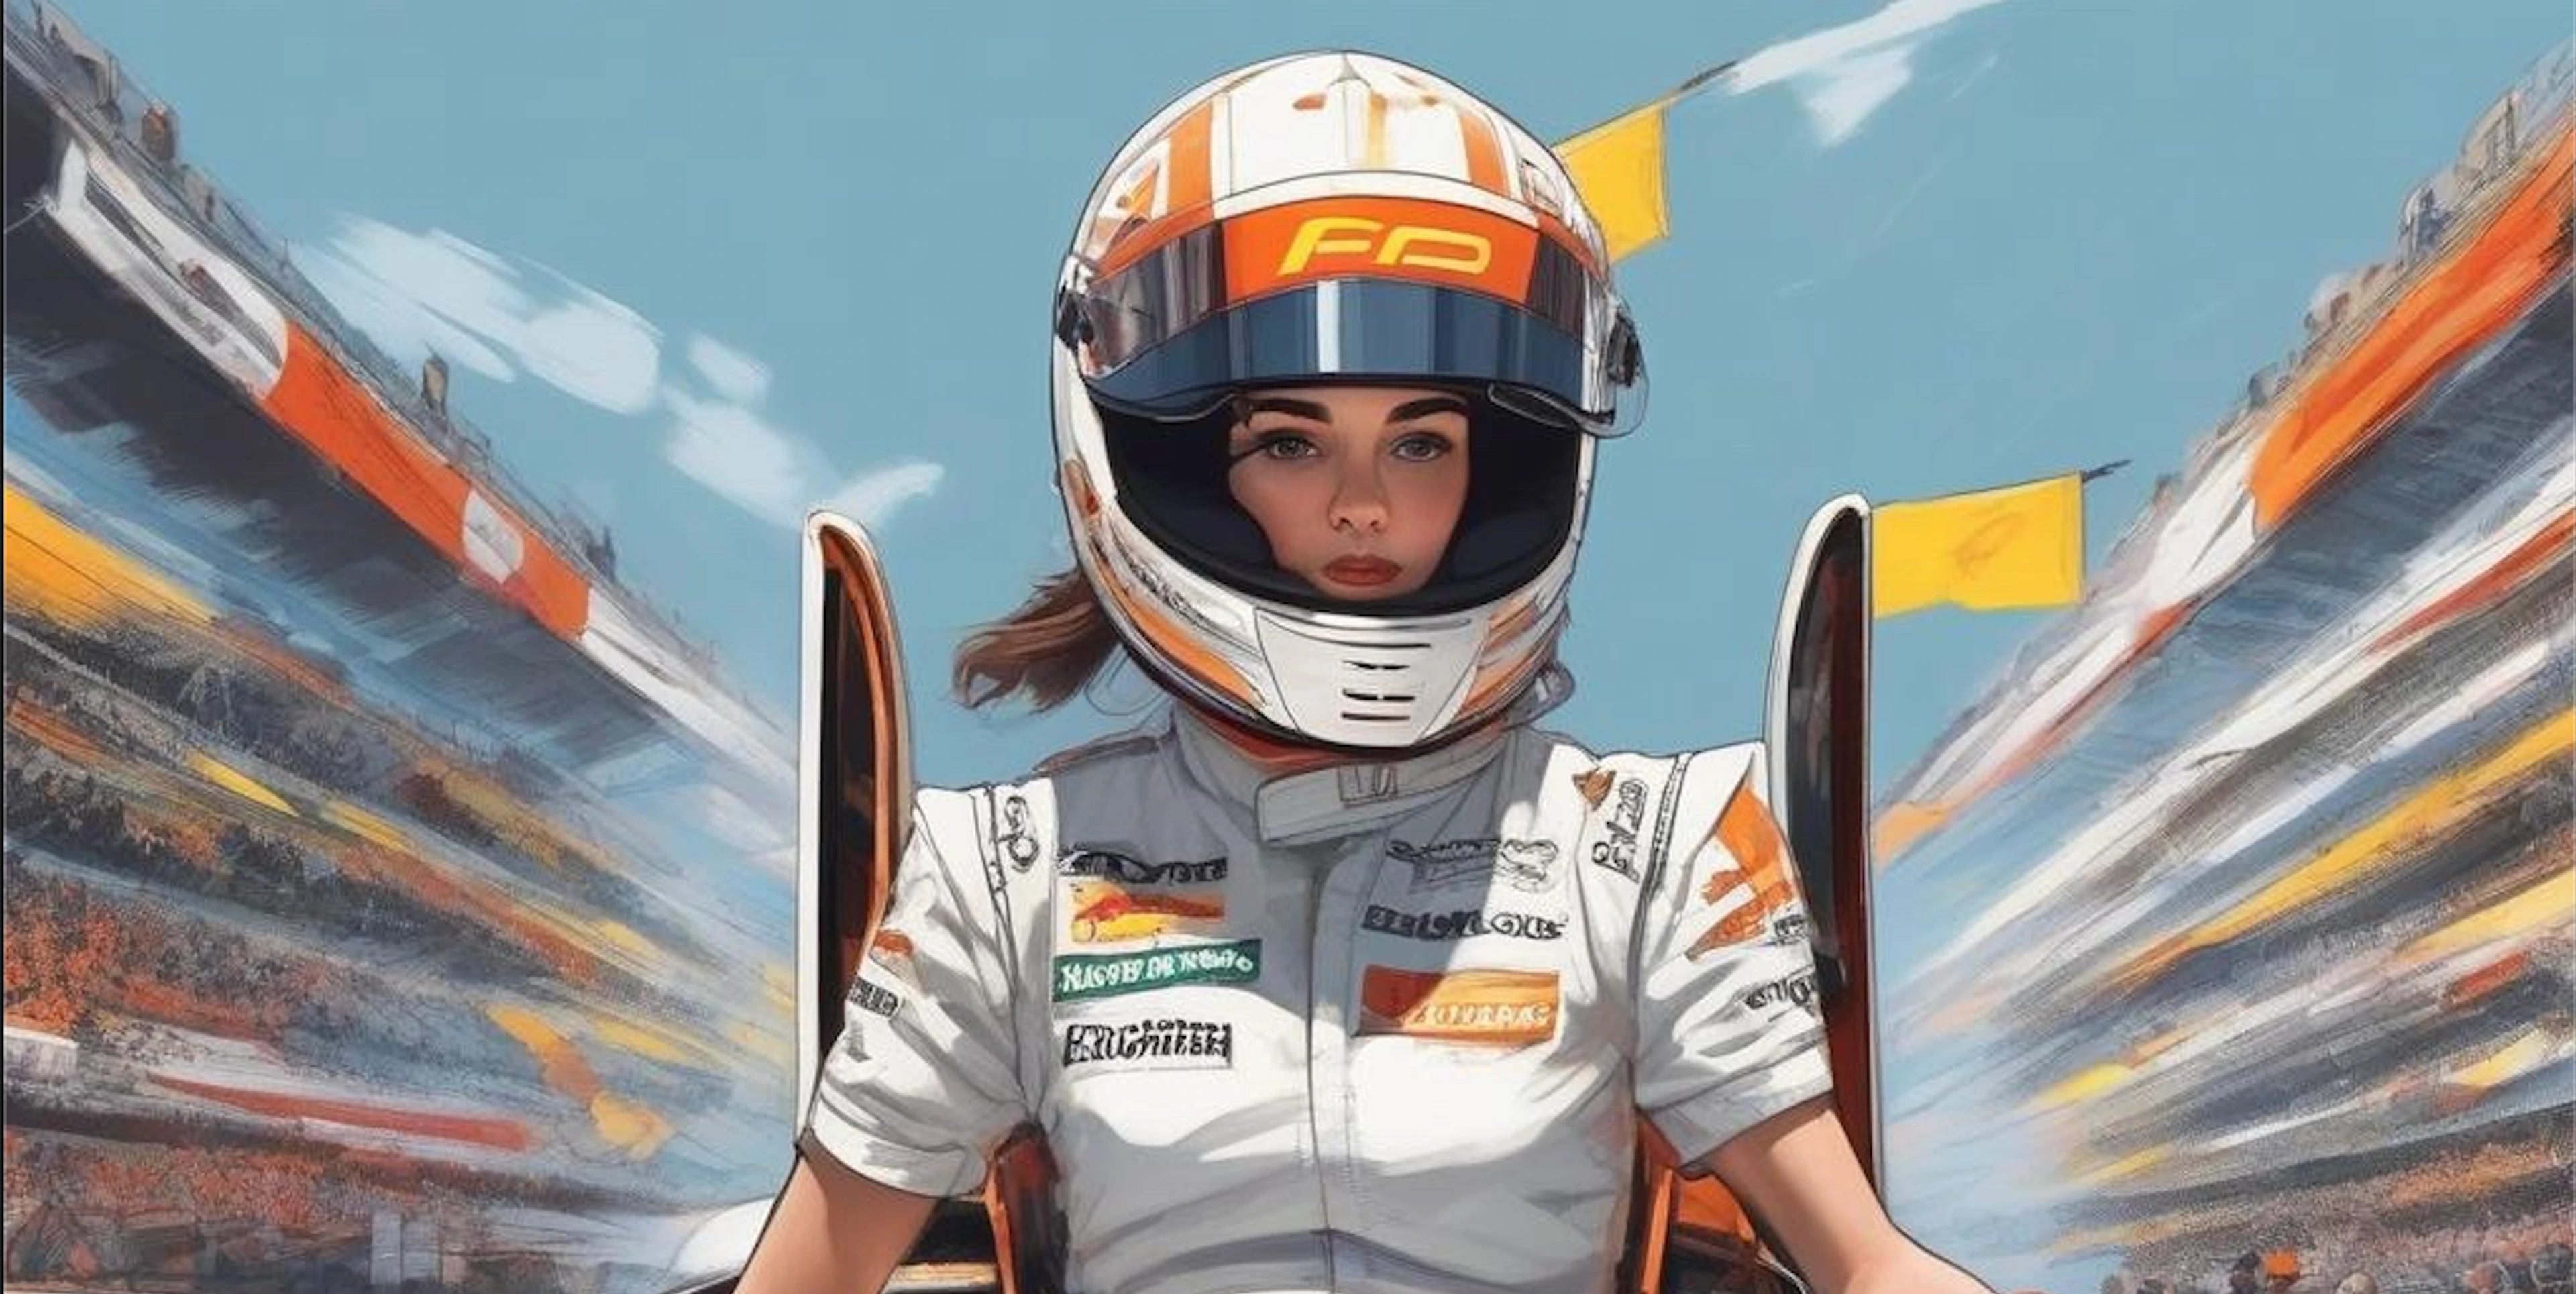 A young woman driving an F1 racecar